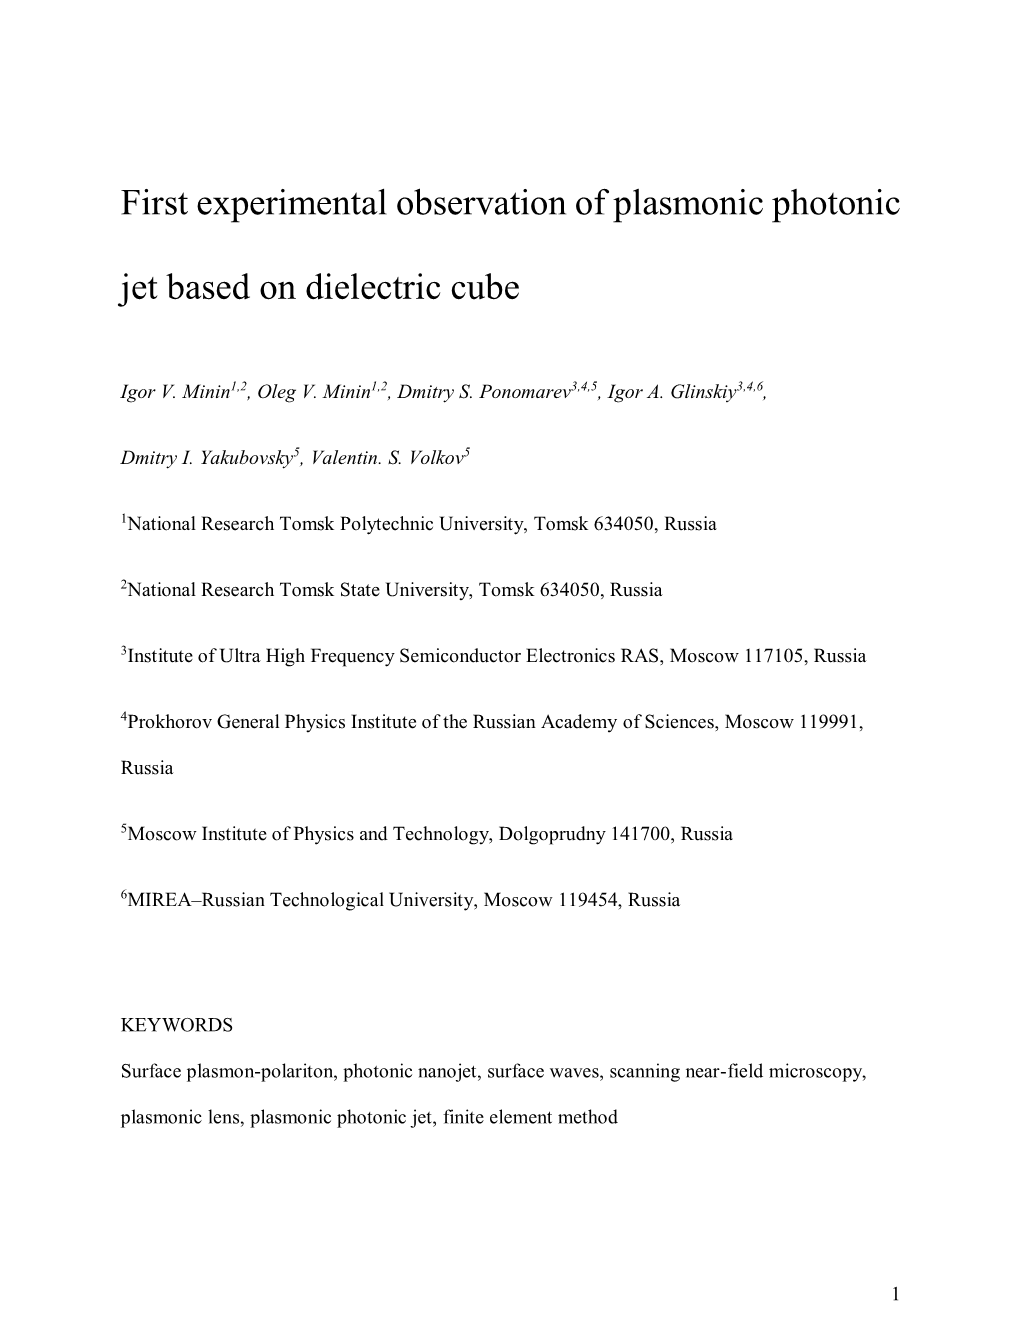 First Experimental Observation of Plasmonic Photonic Jet Based on Dielectric Cube